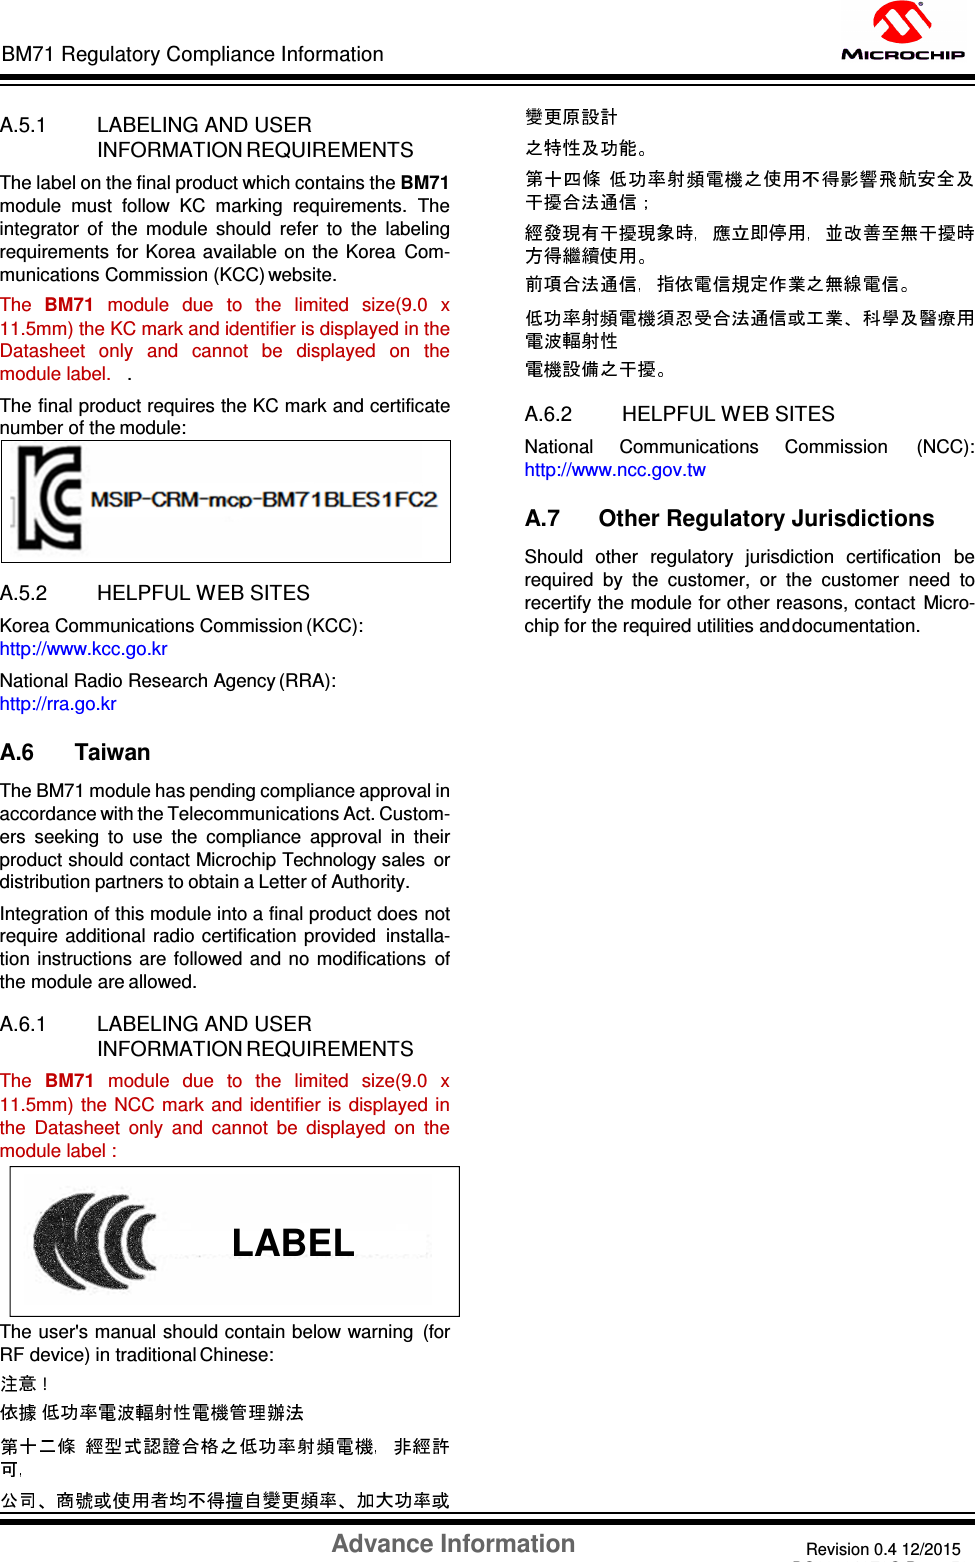 Advance Information Revision 0.4 12/2015 DS60001372C-Page 59 BM71 Regulatory Compliance Information    A.5.1 LABELING AND USER INFORMATION REQUIREMENTS The label on the final product which contains the BM71 module  must  follow  KC  marking  requirements.  The integrator  of  the  module  should  refer  to  the  labeling requirements for Korea available on  the Korea  Com- munications Commission (KCC) website. The  BM71  module  due  to  the  limited  size(9.0  x 11.5mm) the KC mark and identifier is displayed in the Datasheet  only  and  cannot  be  displayed  on  the module label.   .  The final product requires the KC mark and certificate number of the module:   A.5.2 HELPFUL WEB SITES Korea Communications Commission (KCC): http://www.kcc.go.kr National Radio Research Agency (RRA): http://rra.go.kr  A.6 Taiwan The BM71 module has pending compliance approval in accordance with the Telecommunications Act. Custom- ers  seeking  to  use  the  compliance  approval  in  their product should contact Microchip Technology sales  or distribution partners to obtain a Letter of Authority. Integration of this module into a final product does not require  additional  radio certification  provided  installa- tion  instructions are  followed and no modifications  of the module are allowed.  A.6.1 LABELING AND USER INFORMATION REQUIREMENTS The  BM71  module  due  to  the  limited  size(9.0  x 11.5mm)  the NCC mark  and identifier  is displayed  in the  Datasheet  only  and  cannot  be  displayed  on  the module label :  The user&apos;s manual should contain below warning  (for RF device) in traditional Chinese: ! A.6.2 HELPFUL WEB SITES National  Communications  Commission  (NCC): http://www.ncc.gov.tw  A.7      Other Regulatory Jurisdictions Should  other  regulatory  jurisdiction  certification  be required  by  the  customer,  or  the  customer  need  to recertify the module for other reasons, contact  Micro- chip for the required utilities and documentation.                                             LABEL 